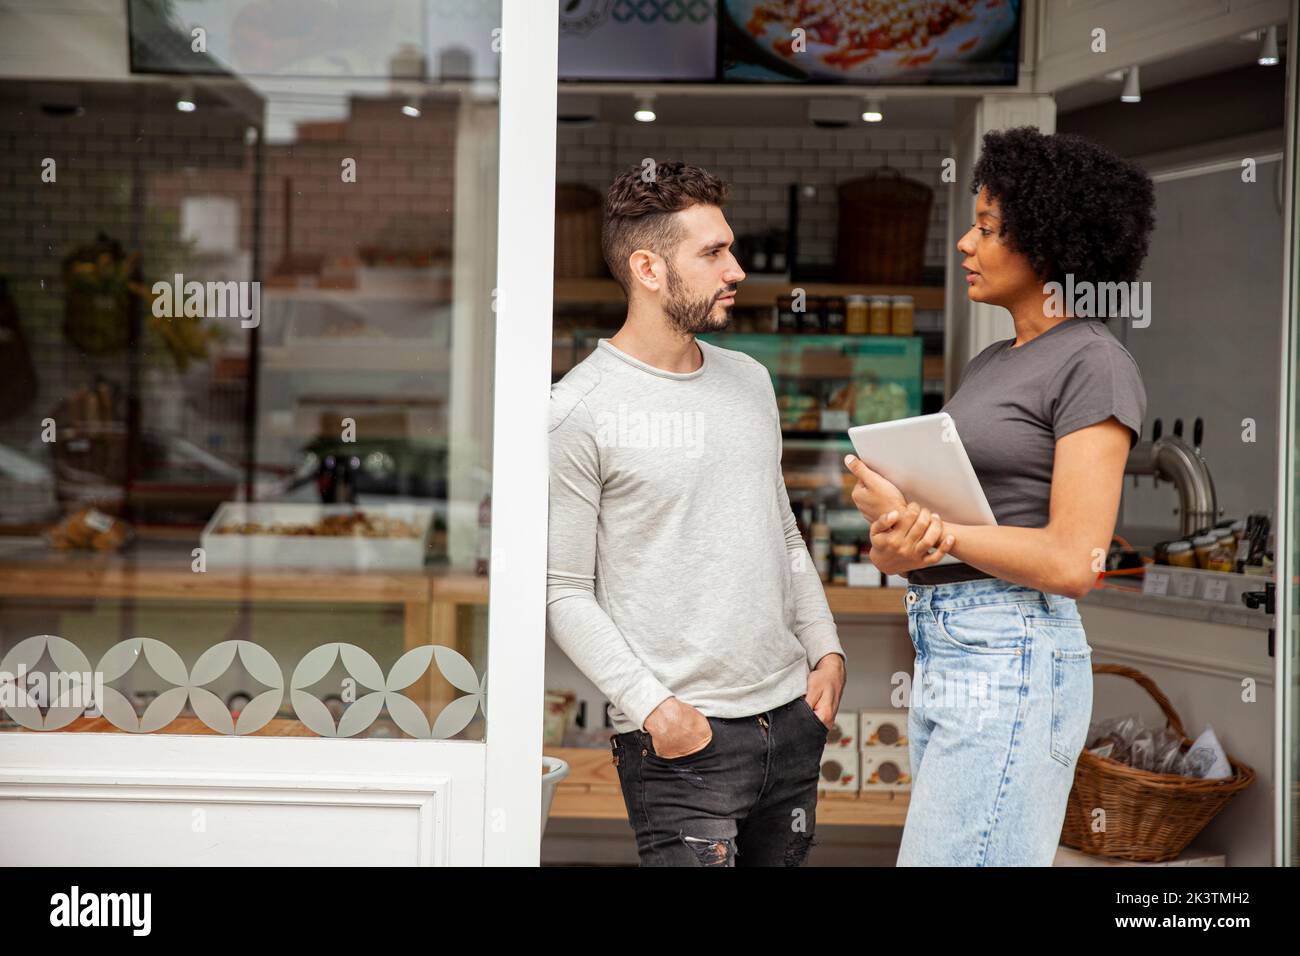 African American bakery owner standing with colleague Stock Photo